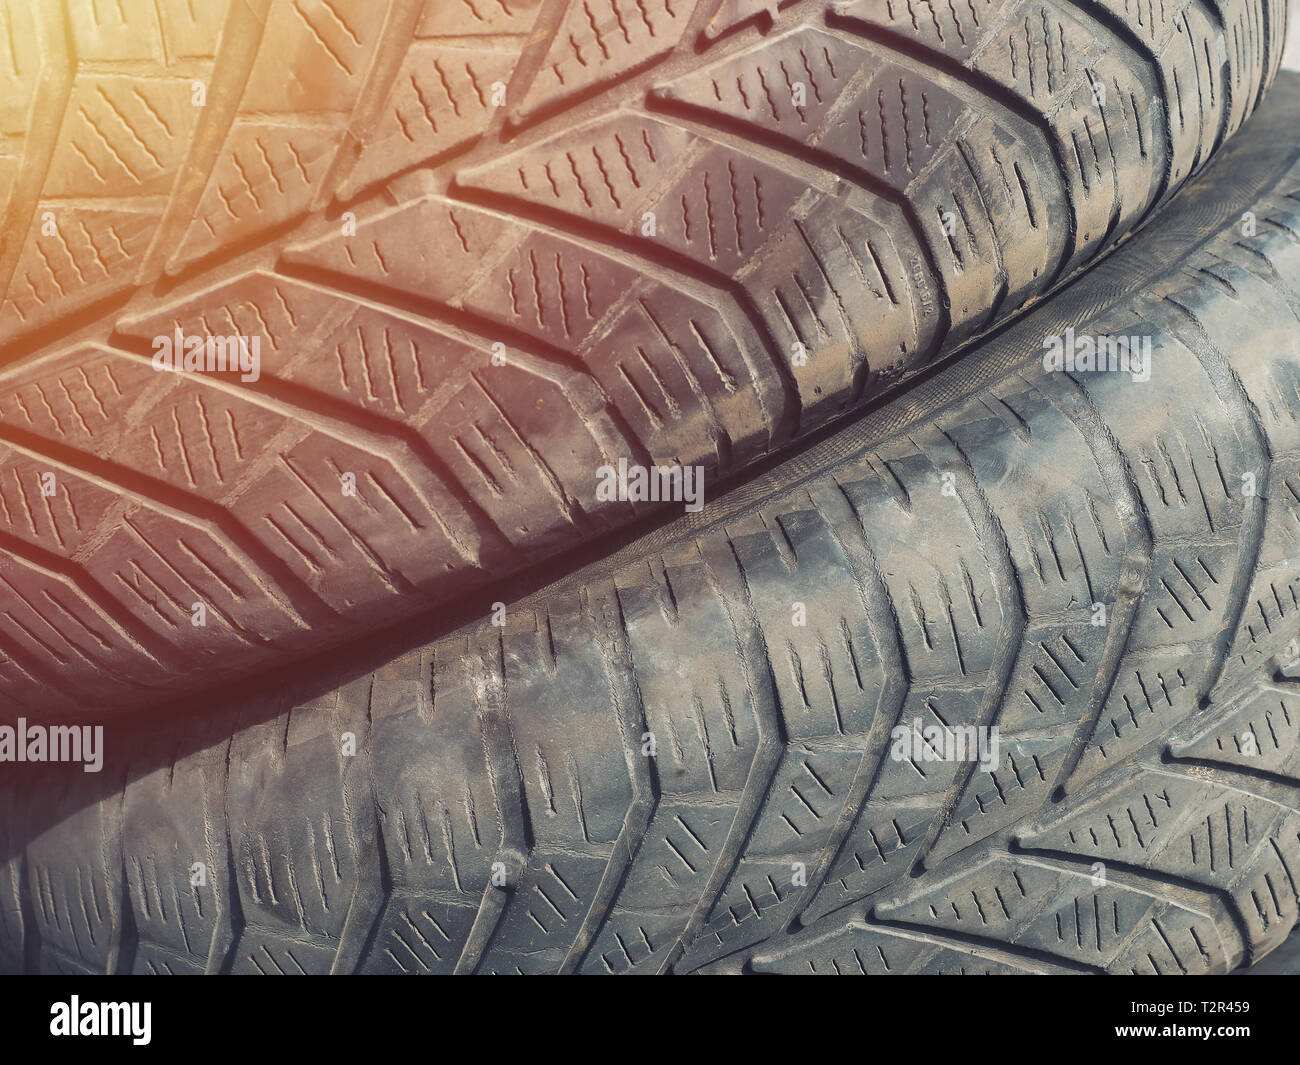 Car tire, close-up detail and maintenance of used tire Stock Photo